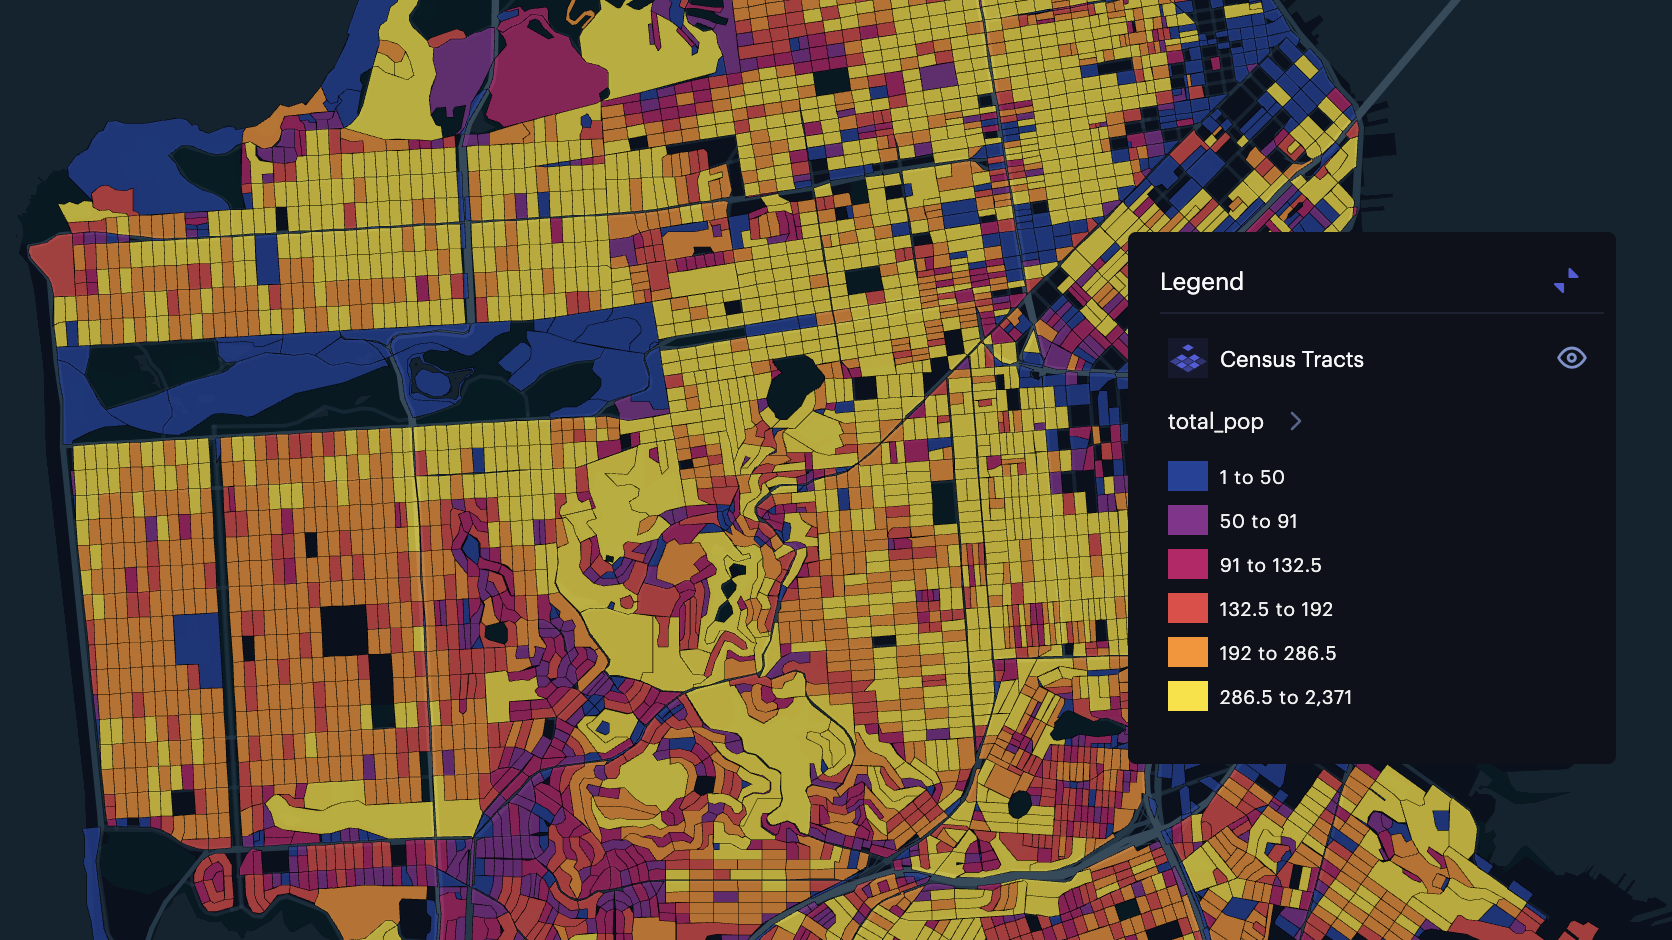 Census tracts in San Francisco (with a dynamic color scale).